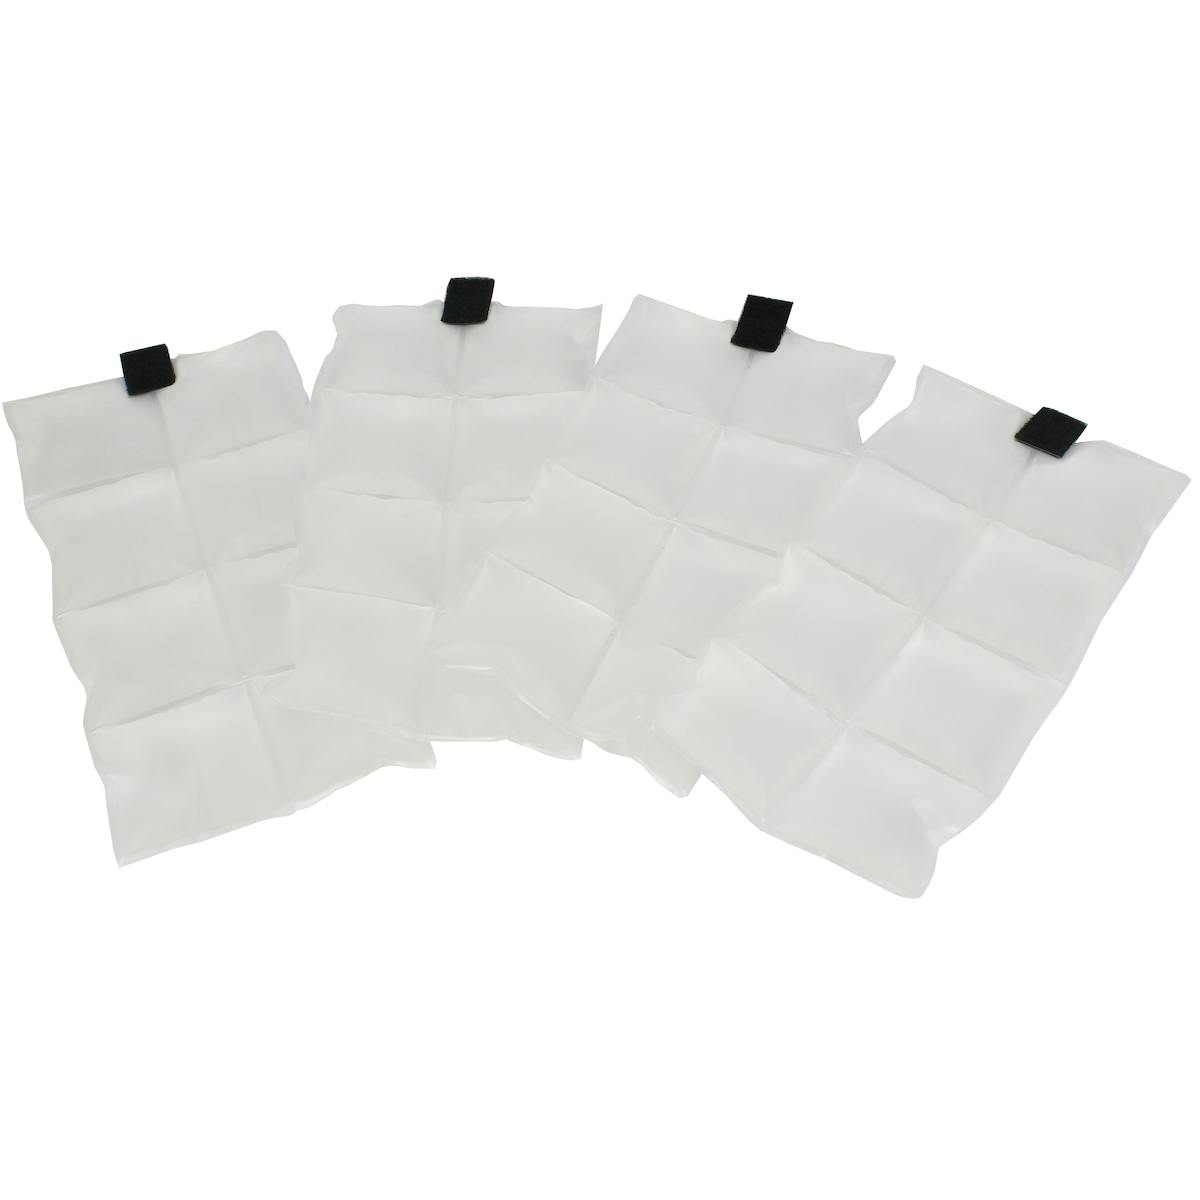 Replacement Phase Change Cooling Packs - 4 Pack, Clear (390-HY099) - OS